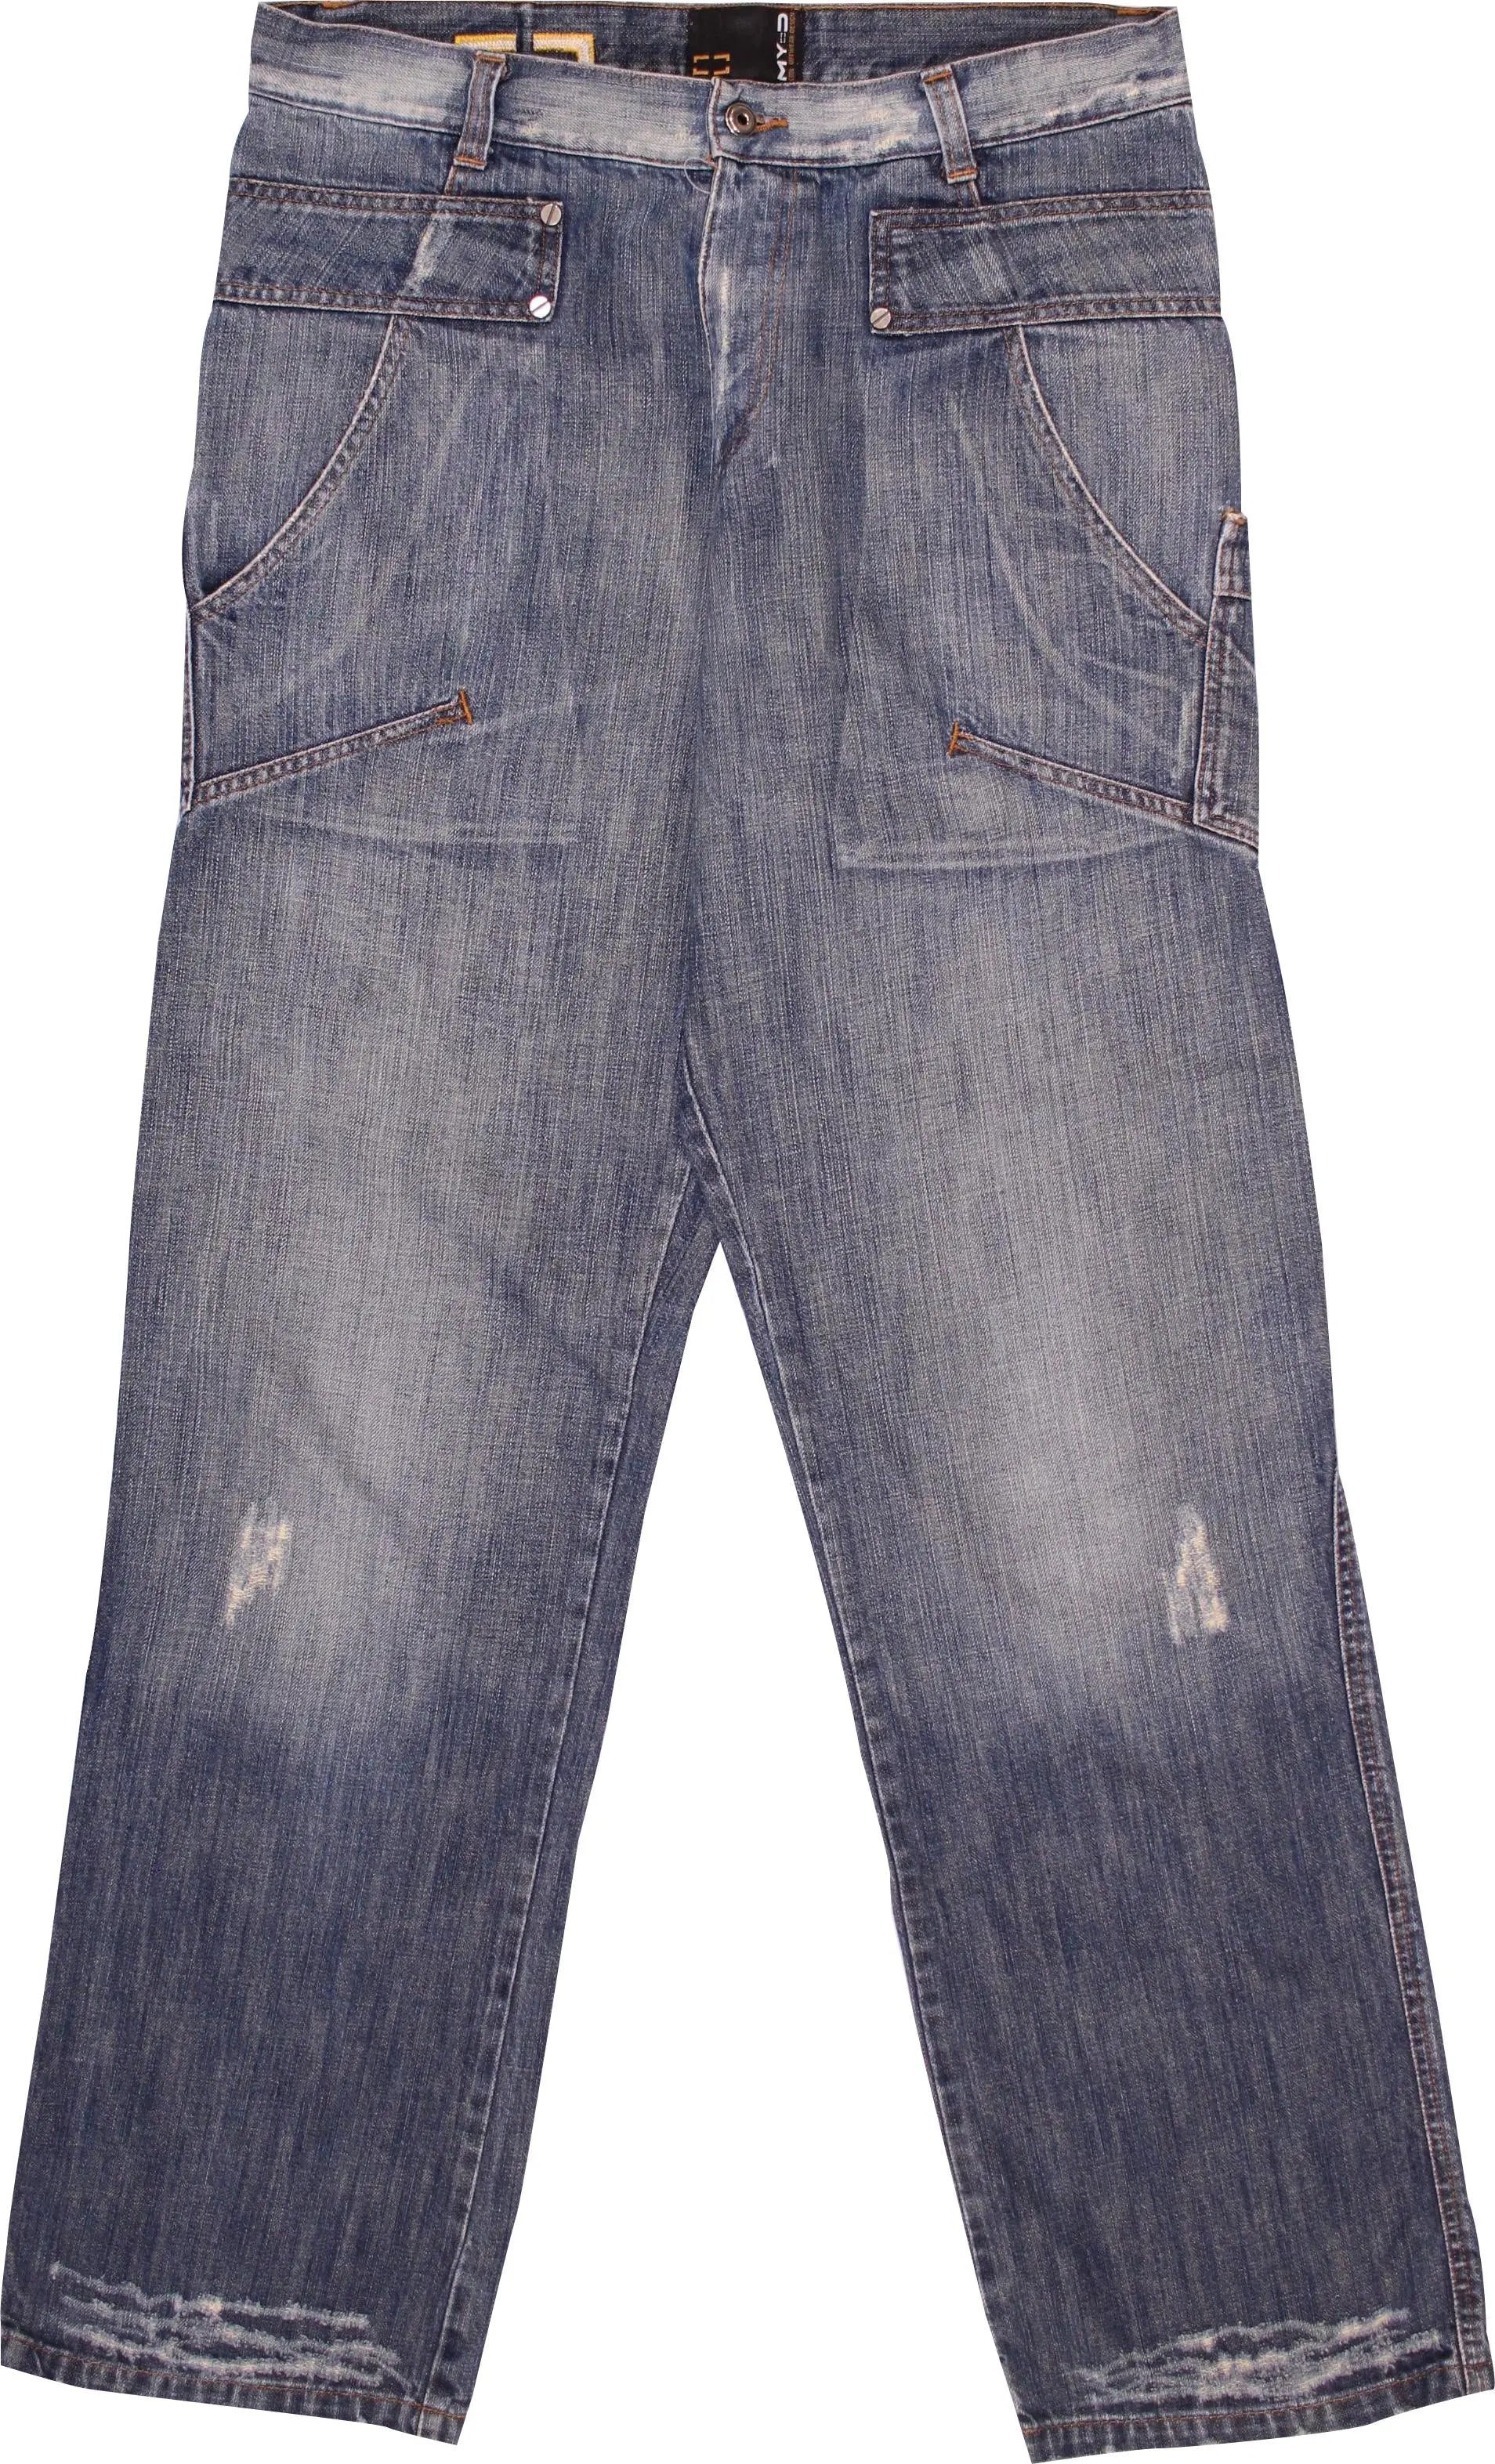 My D - 00s Jeans- ThriftTale.com - Vintage and second handclothing